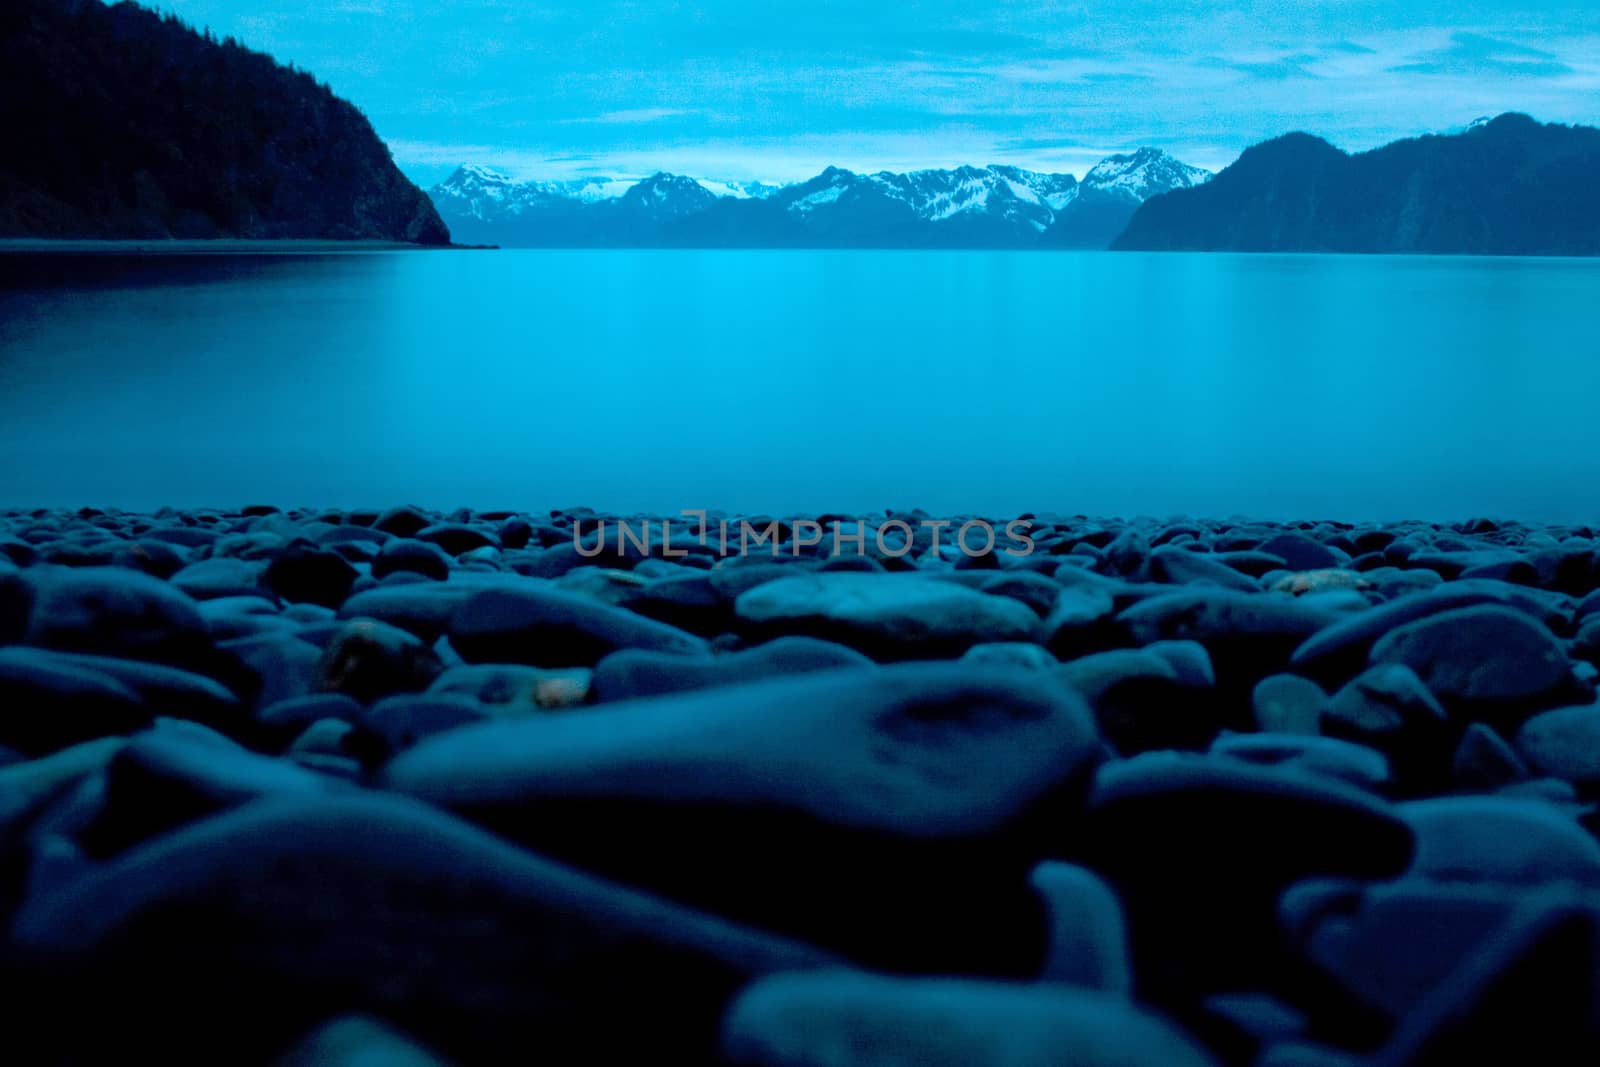 Smooth beach stones on the shore in the foreground of a landscape photo overlooking the ocean and mountains in Seward Alaska at midnight. 